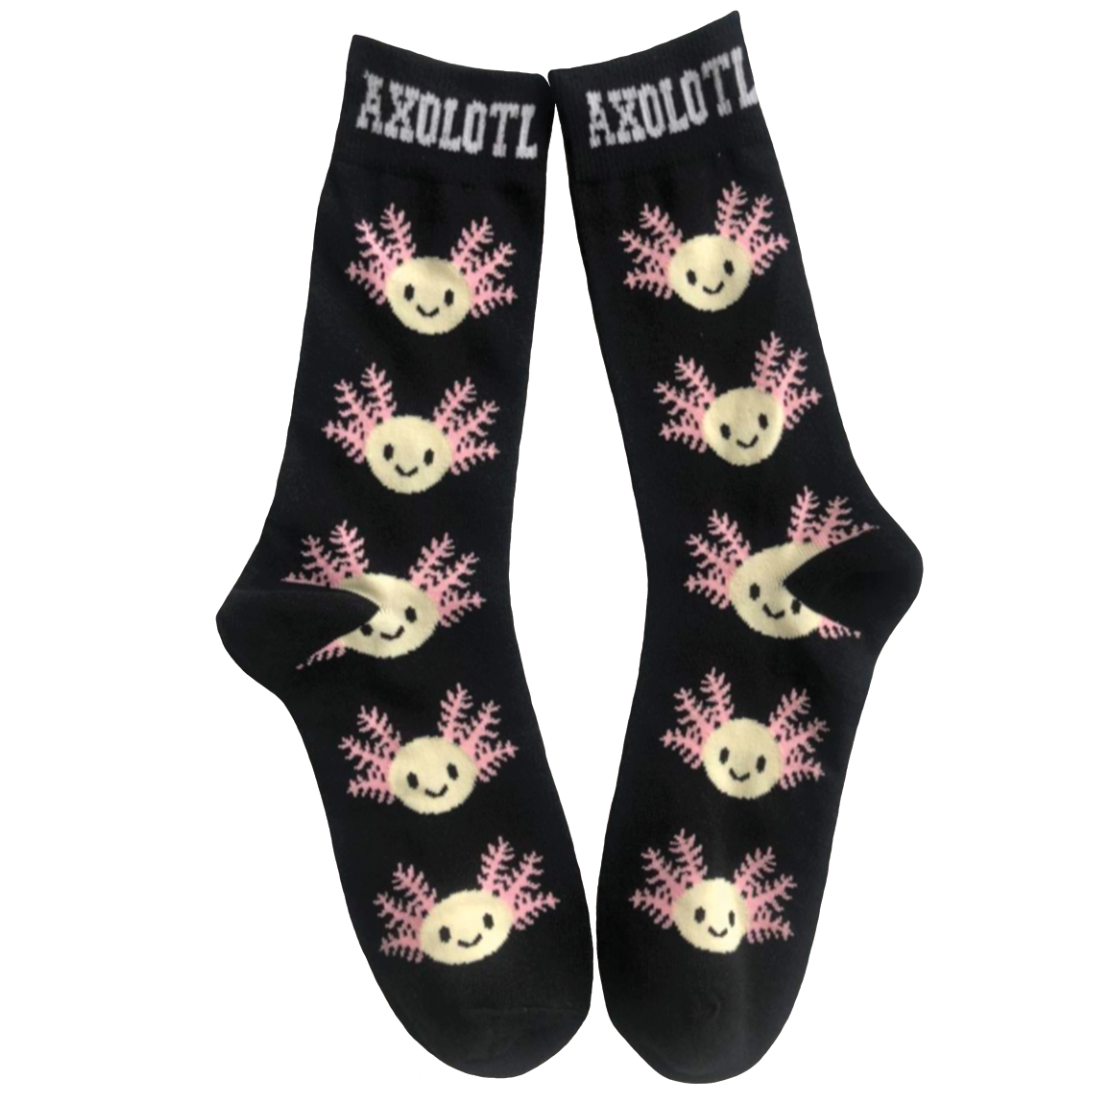 Comfortable and unique Tank Life Apparel crew socks for the axolotl keepers that want to show off their favorite animal anywhere they go. 